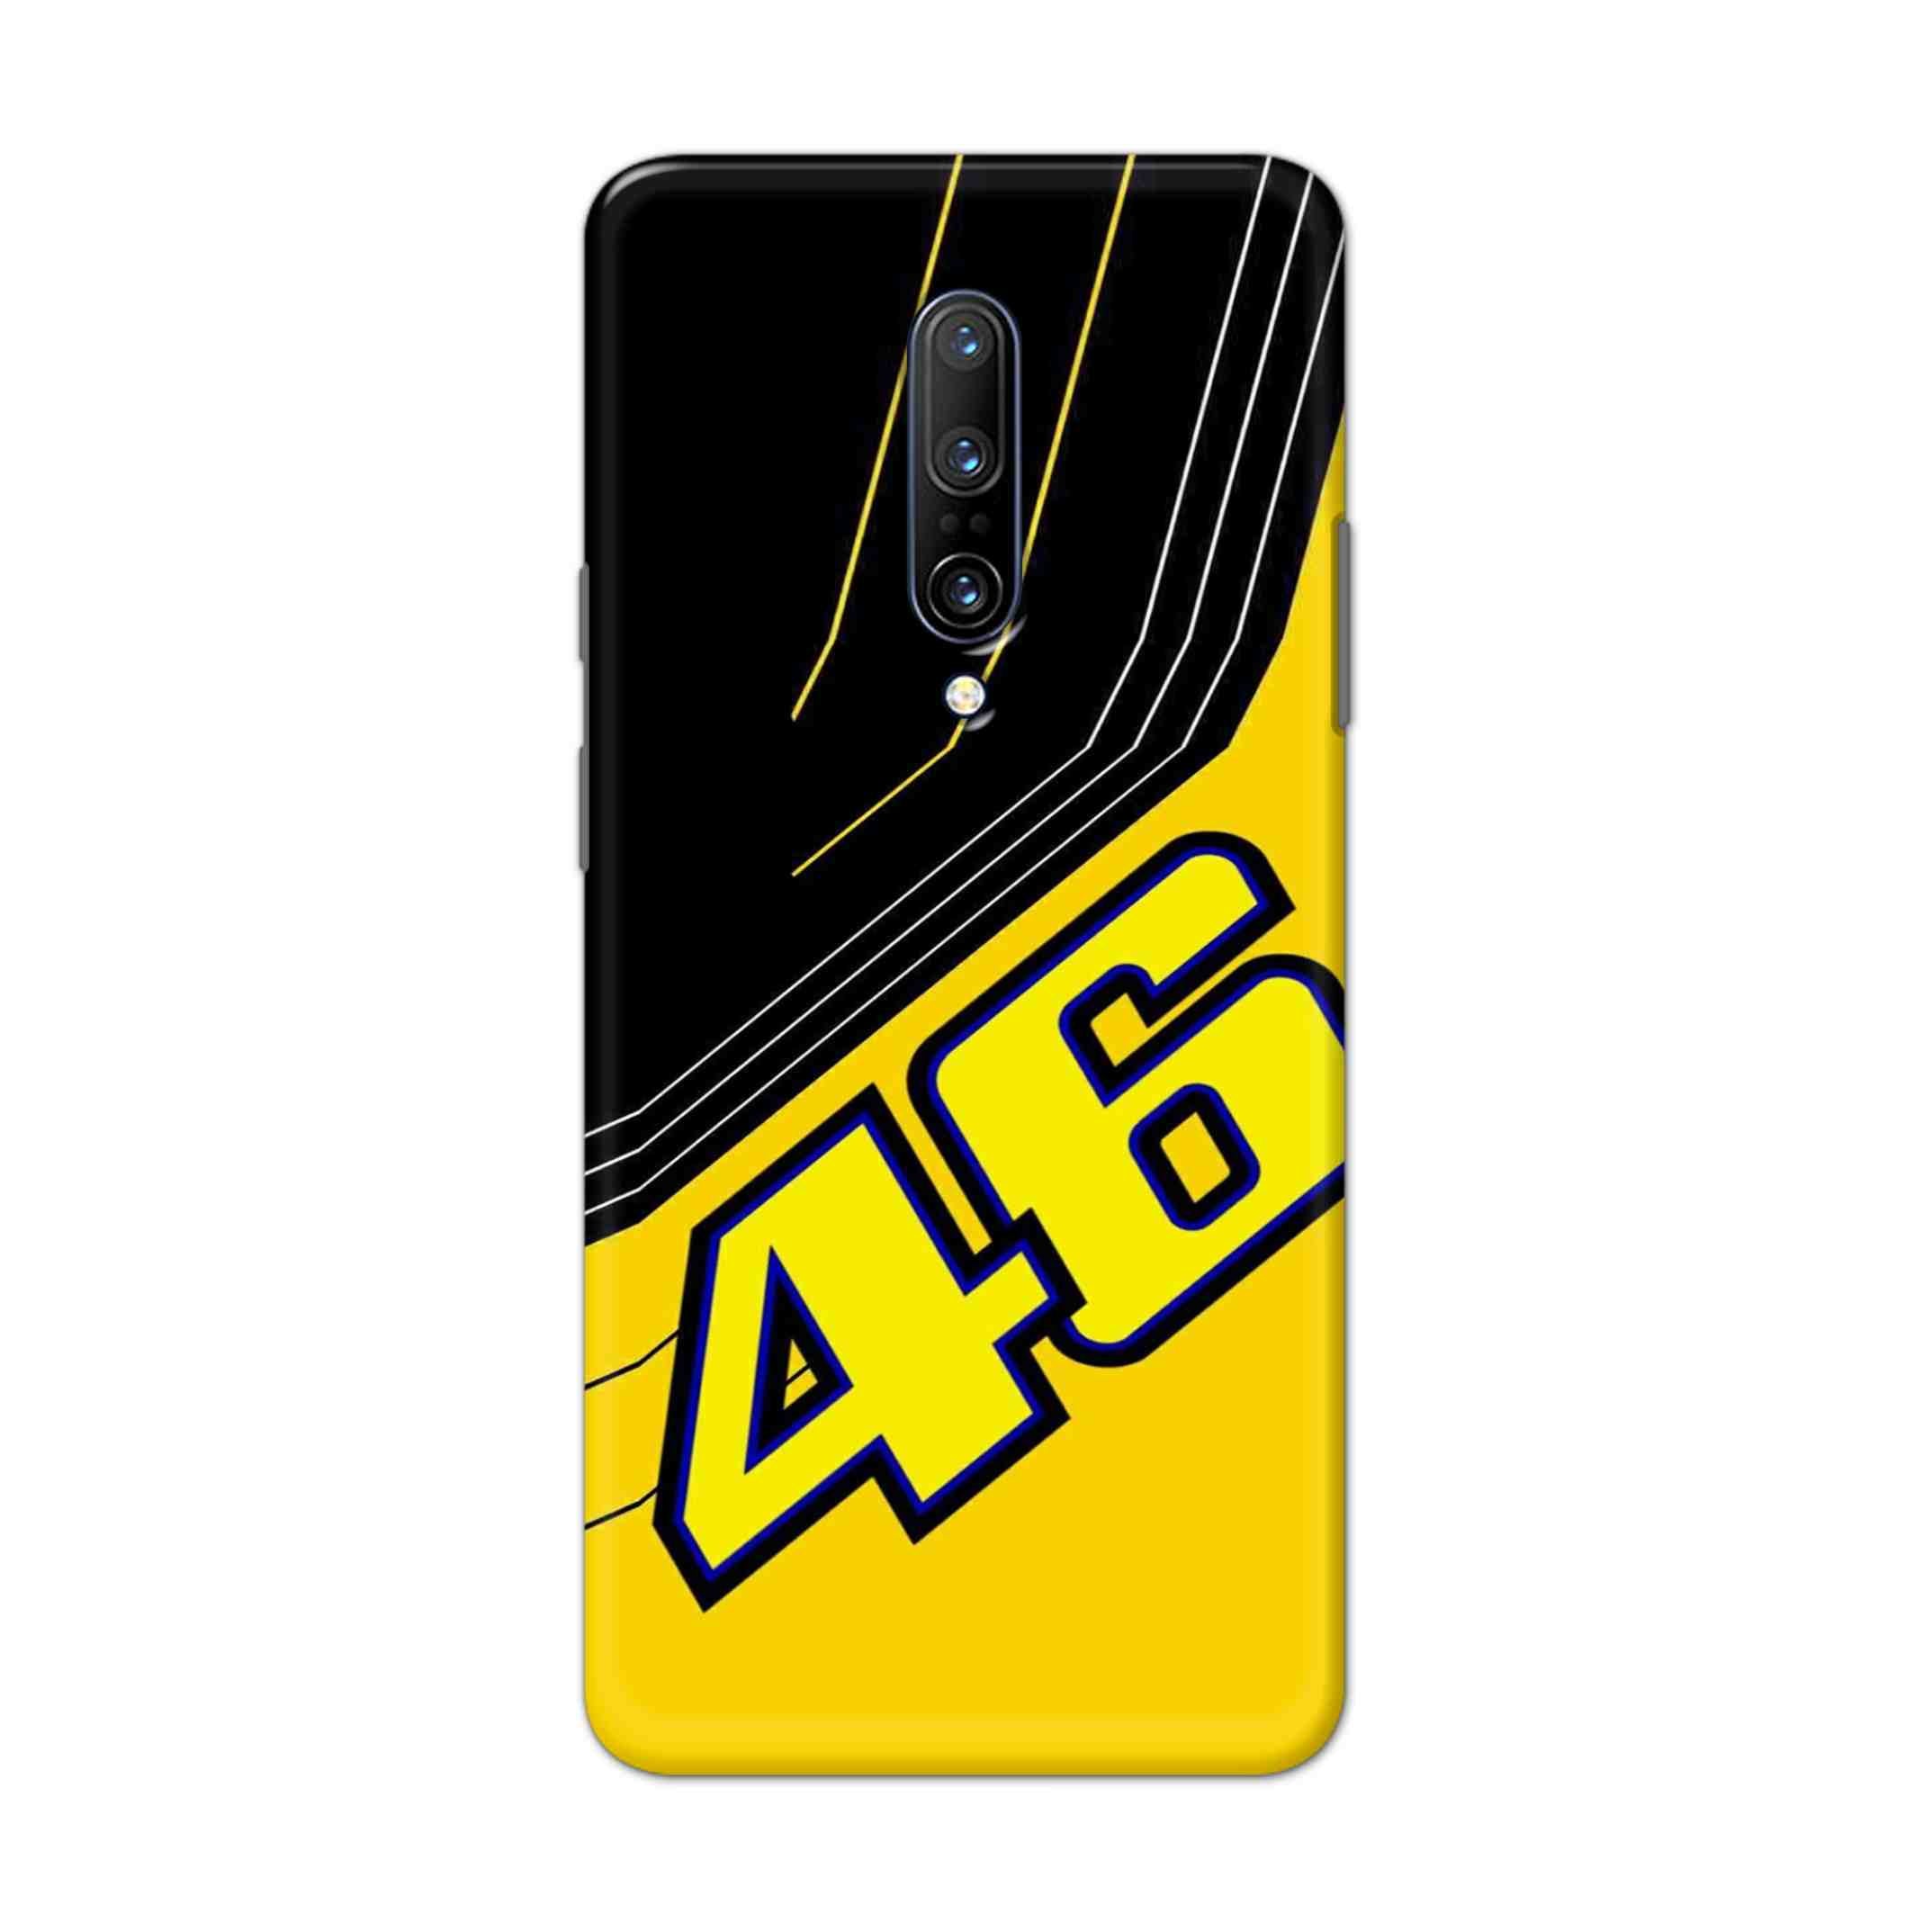 Buy 46 Hard Back Mobile Phone Case Cover For OnePlus 7 Pro Online